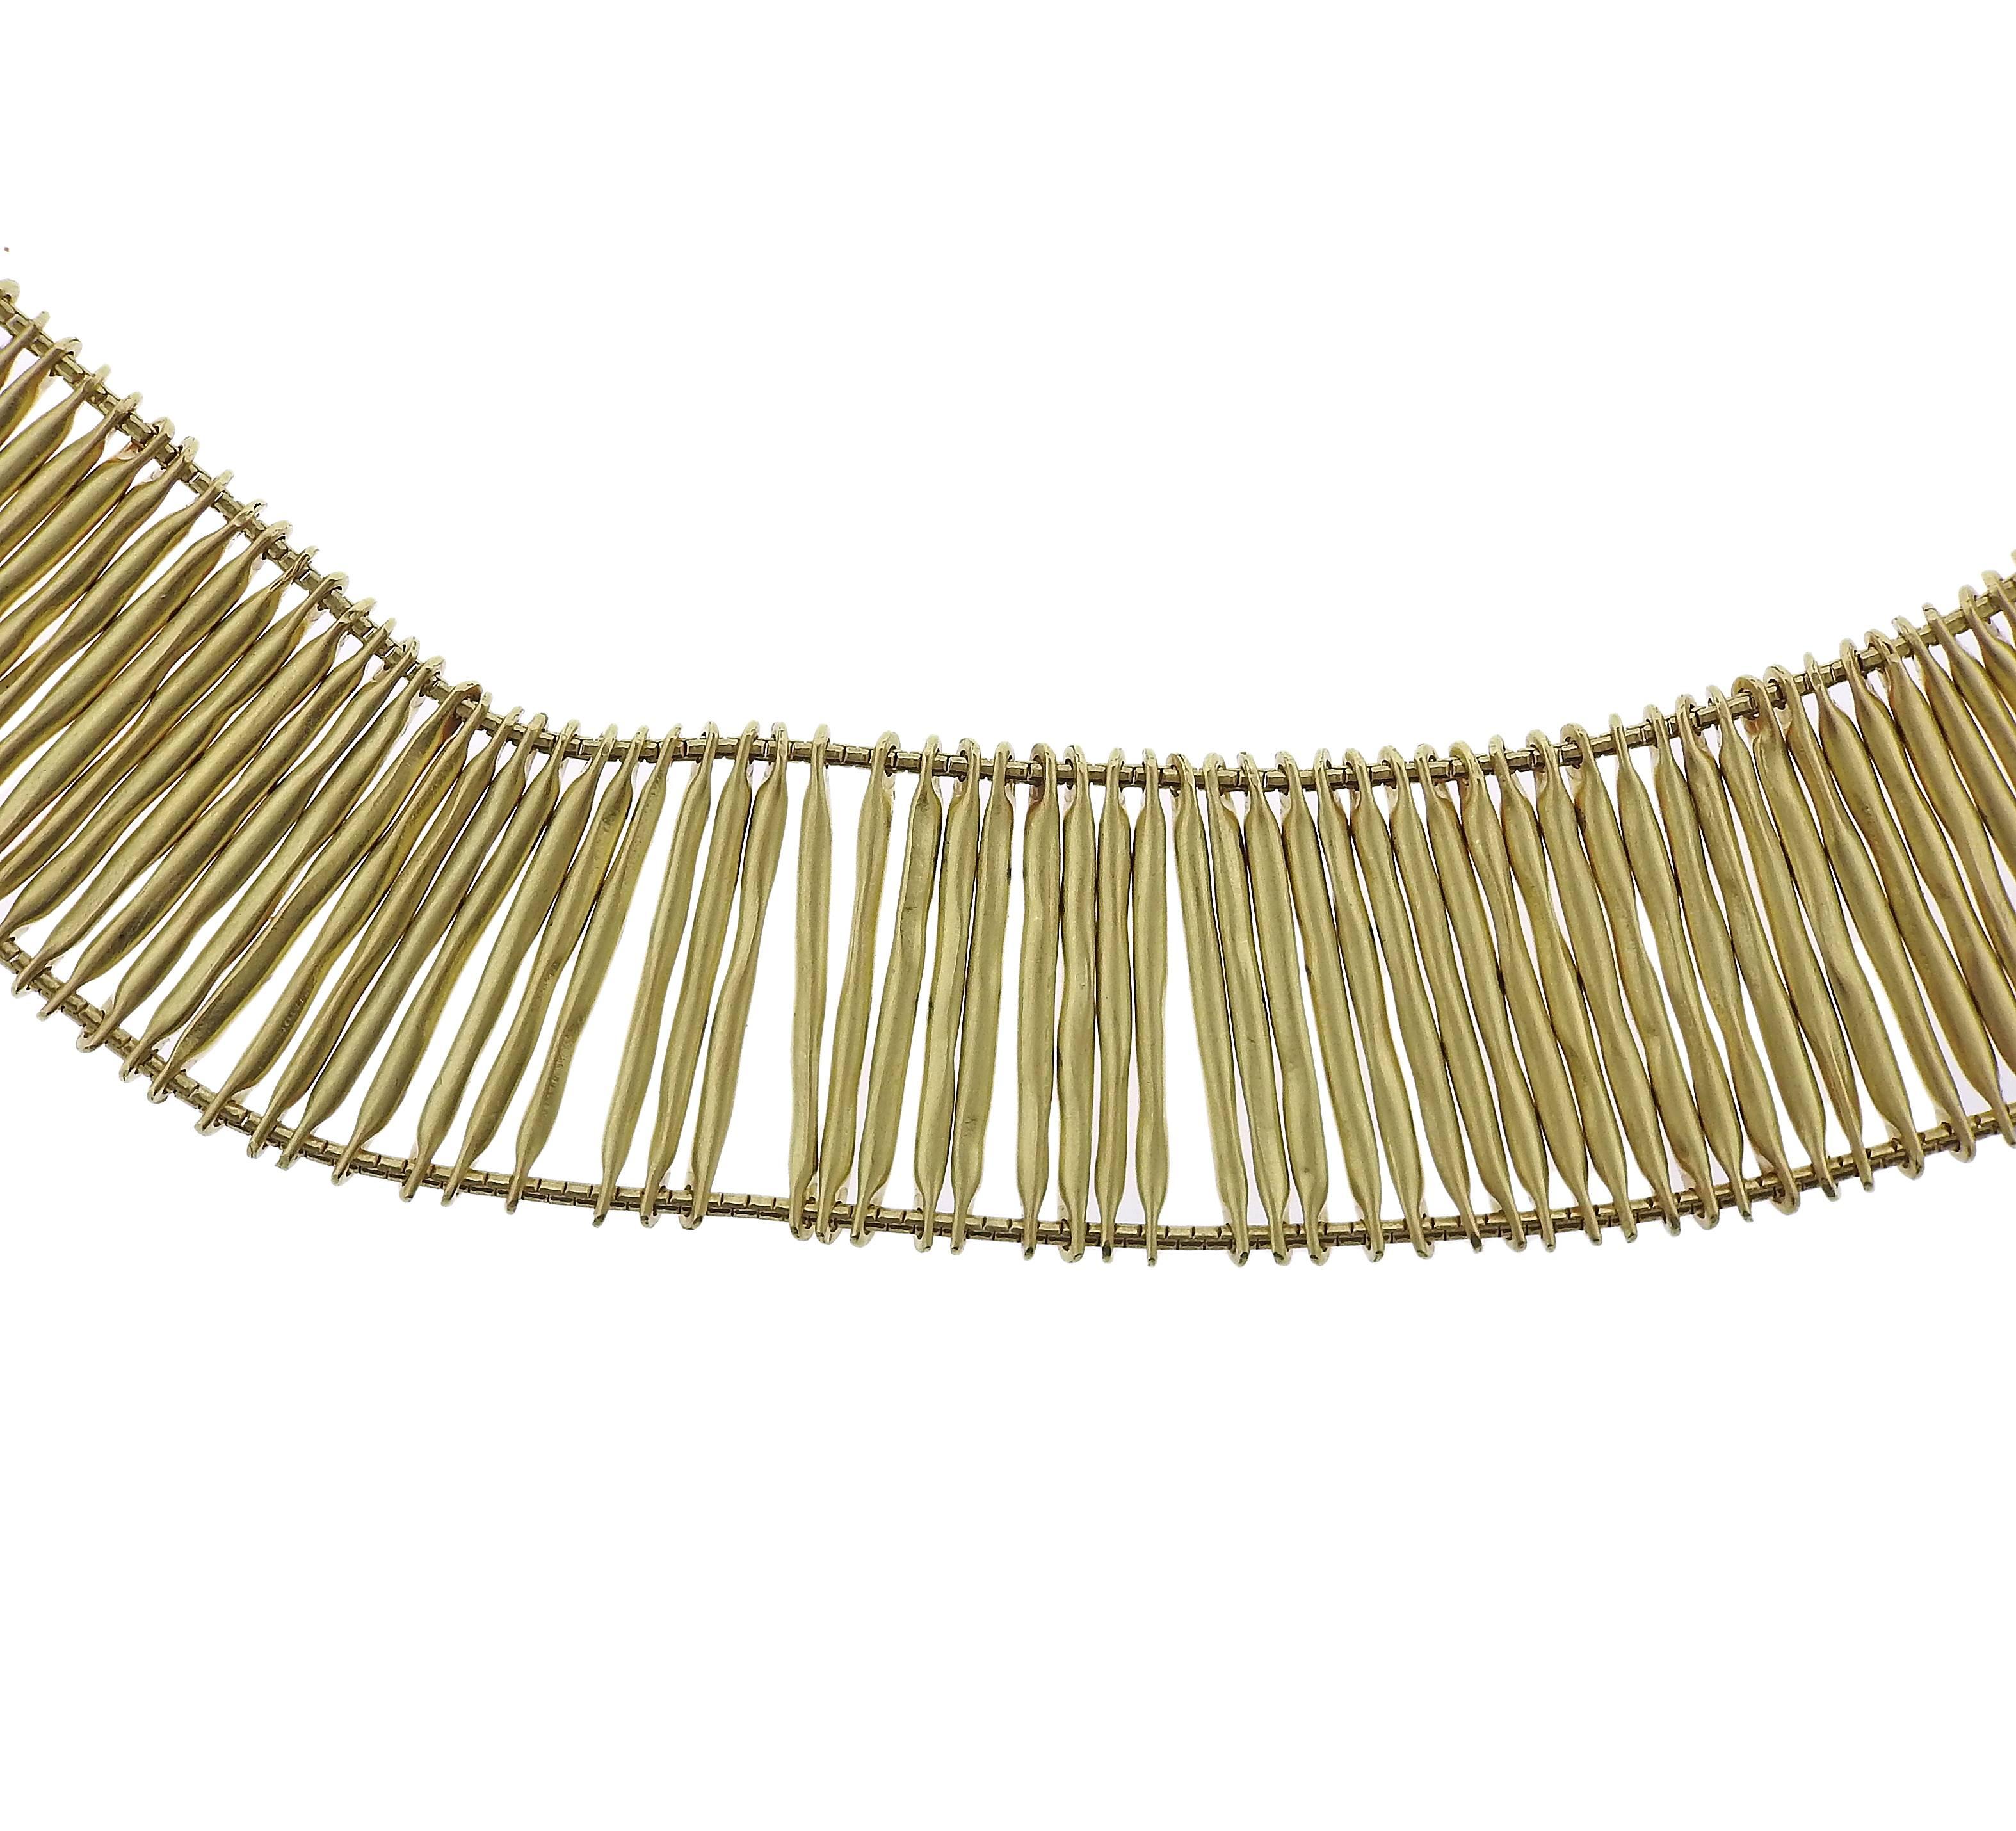 An 18k yellow gold necklace, crafted by H. Stern for Filaments collection, adorned with one diamond on the clasp end.Necklace is extendable up to 20